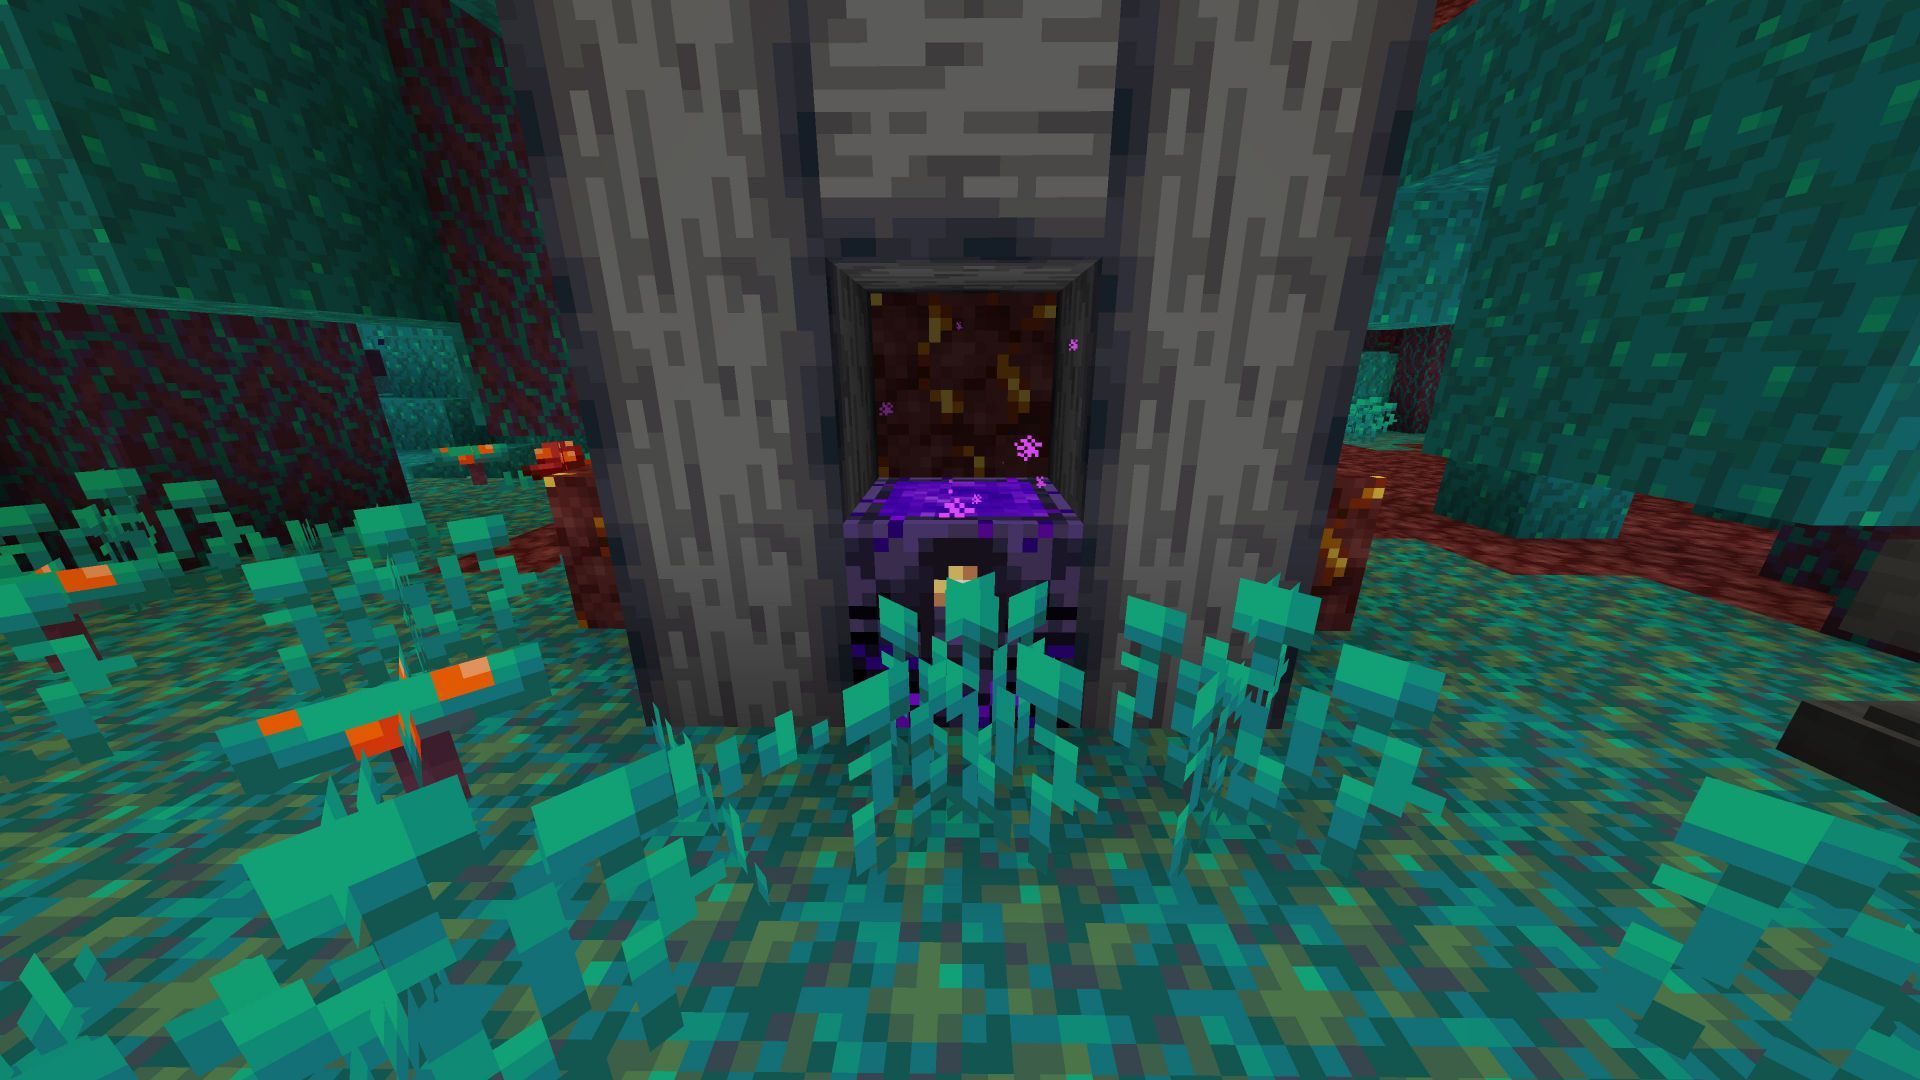 Updating Minecraft 1.16 allows spawn from Nether